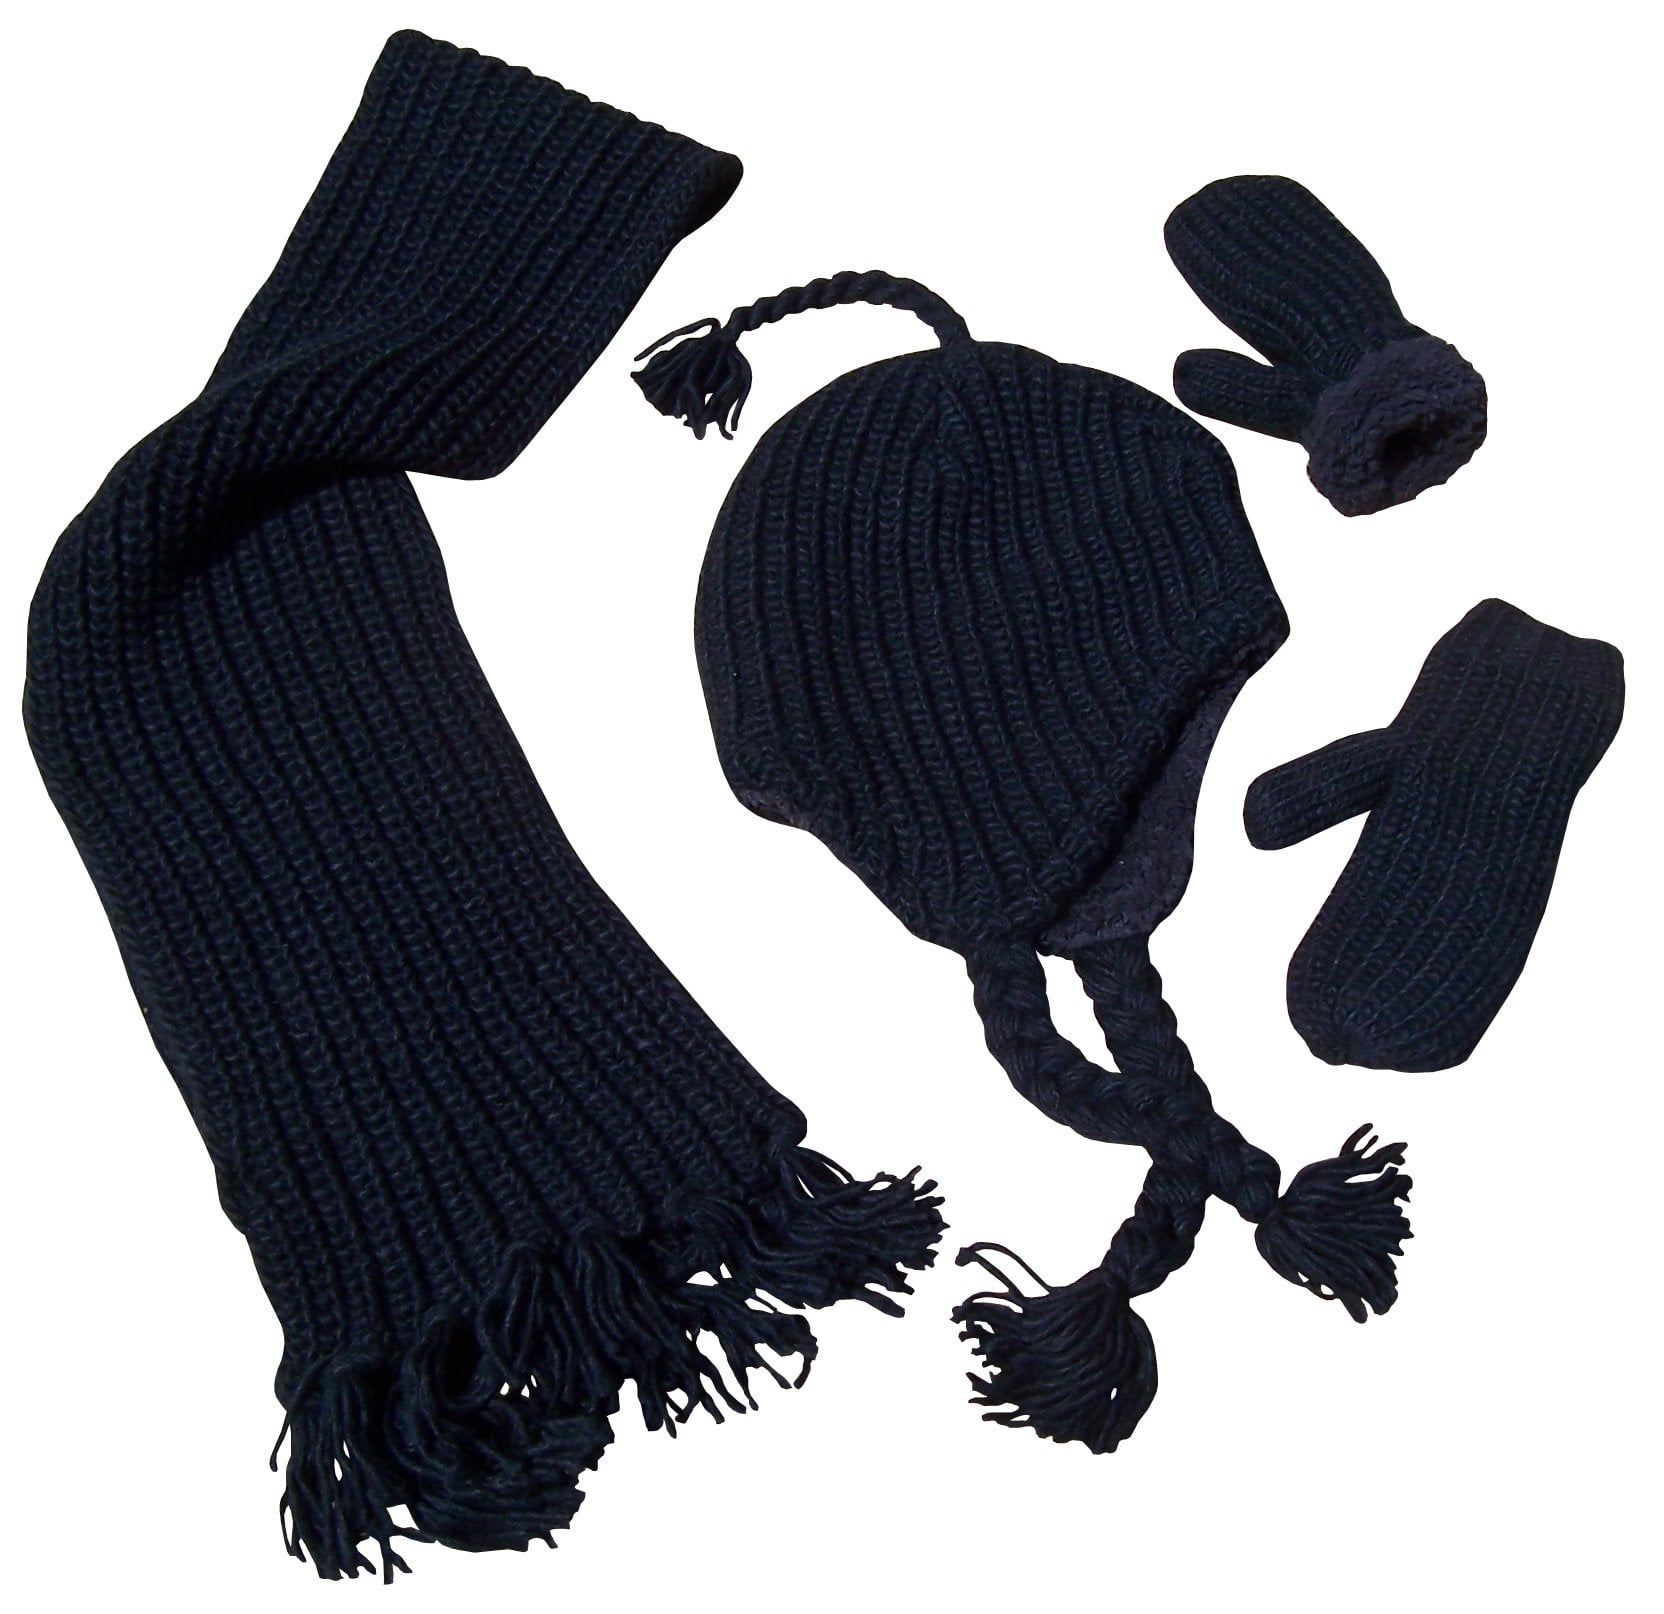 NICE CAPS Boys Toddler Baby Knit 3PC Hat Mittens Scarf Winter Snow Accessory Set 